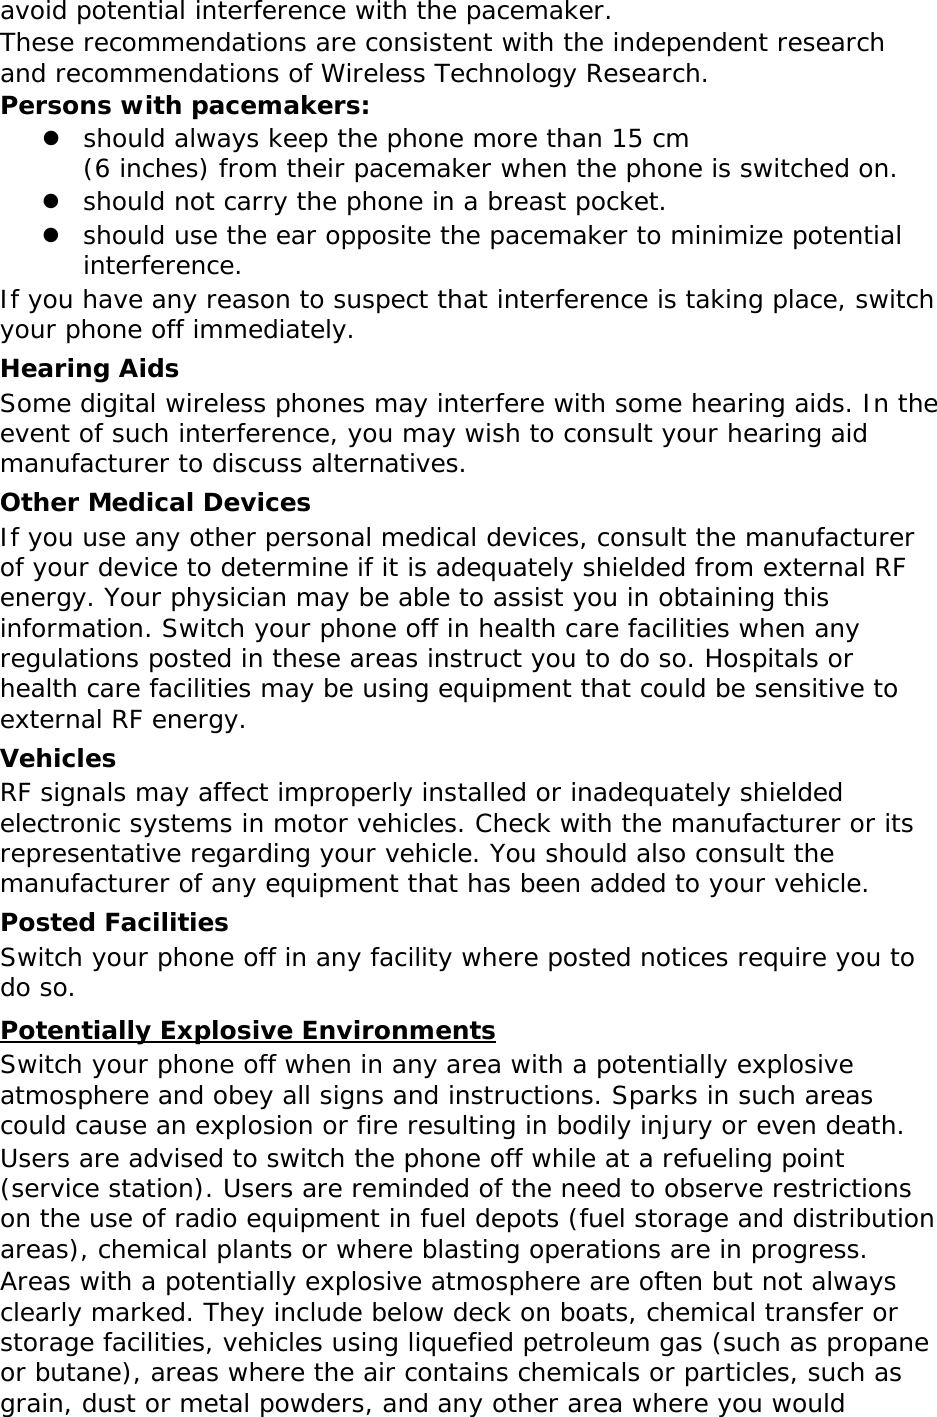 avoid potential interference with the pacemaker. These recommendations are consistent with the independent research and recommendations of Wireless Technology Research. Persons with pacemakers:  should always keep the phone more than 15 cm  (6 inches) from their pacemaker when the phone is switched on.  should not carry the phone in a breast pocket.  should use the ear opposite the pacemaker to minimize potential interference. If you have any reason to suspect that interference is taking place, switch your phone off immediately. Hearing Aids Some digital wireless phones may interfere with some hearing aids. In the event of such interference, you may wish to consult your hearing aid manufacturer to discuss alternatives. Other Medical Devices If you use any other personal medical devices, consult the manufacturer of your device to determine if it is adequately shielded from external RF energy. Your physician may be able to assist you in obtaining this information. Switch your phone off in health care facilities when any regulations posted in these areas instruct you to do so. Hospitals or health care facilities may be using equipment that could be sensitive to external RF energy. Vehicles RF signals may affect improperly installed or inadequately shielded electronic systems in motor vehicles. Check with the manufacturer or its representative regarding your vehicle. You should also consult the manufacturer of any equipment that has been added to your vehicle. Posted Facilities Switch your phone off in any facility where posted notices require you to do so. Switch your phone off when in any area with a potentially explosive atmosphere and obey all signs and instructions. Sparks in such areas could cause an explosion or fire resulting in bodily injury or even death. Potentially Explosive Environments Users are advised to switch the phone off while at a refueling point (service station). Users are reminded of the need to observe restrictions on the use of radio equipment in fuel depots (fuel storage and distribution areas), chemical plants or where blasting operations are in progress. Areas with a potentially explosive atmosphere are often but not always clearly marked. They include below deck on boats, chemical transfer or storage facilities, vehicles using liquefied petroleum gas (such as propane or butane), areas where the air contains chemicals or particles, such as grain, dust or metal powders, and any other area where you would 